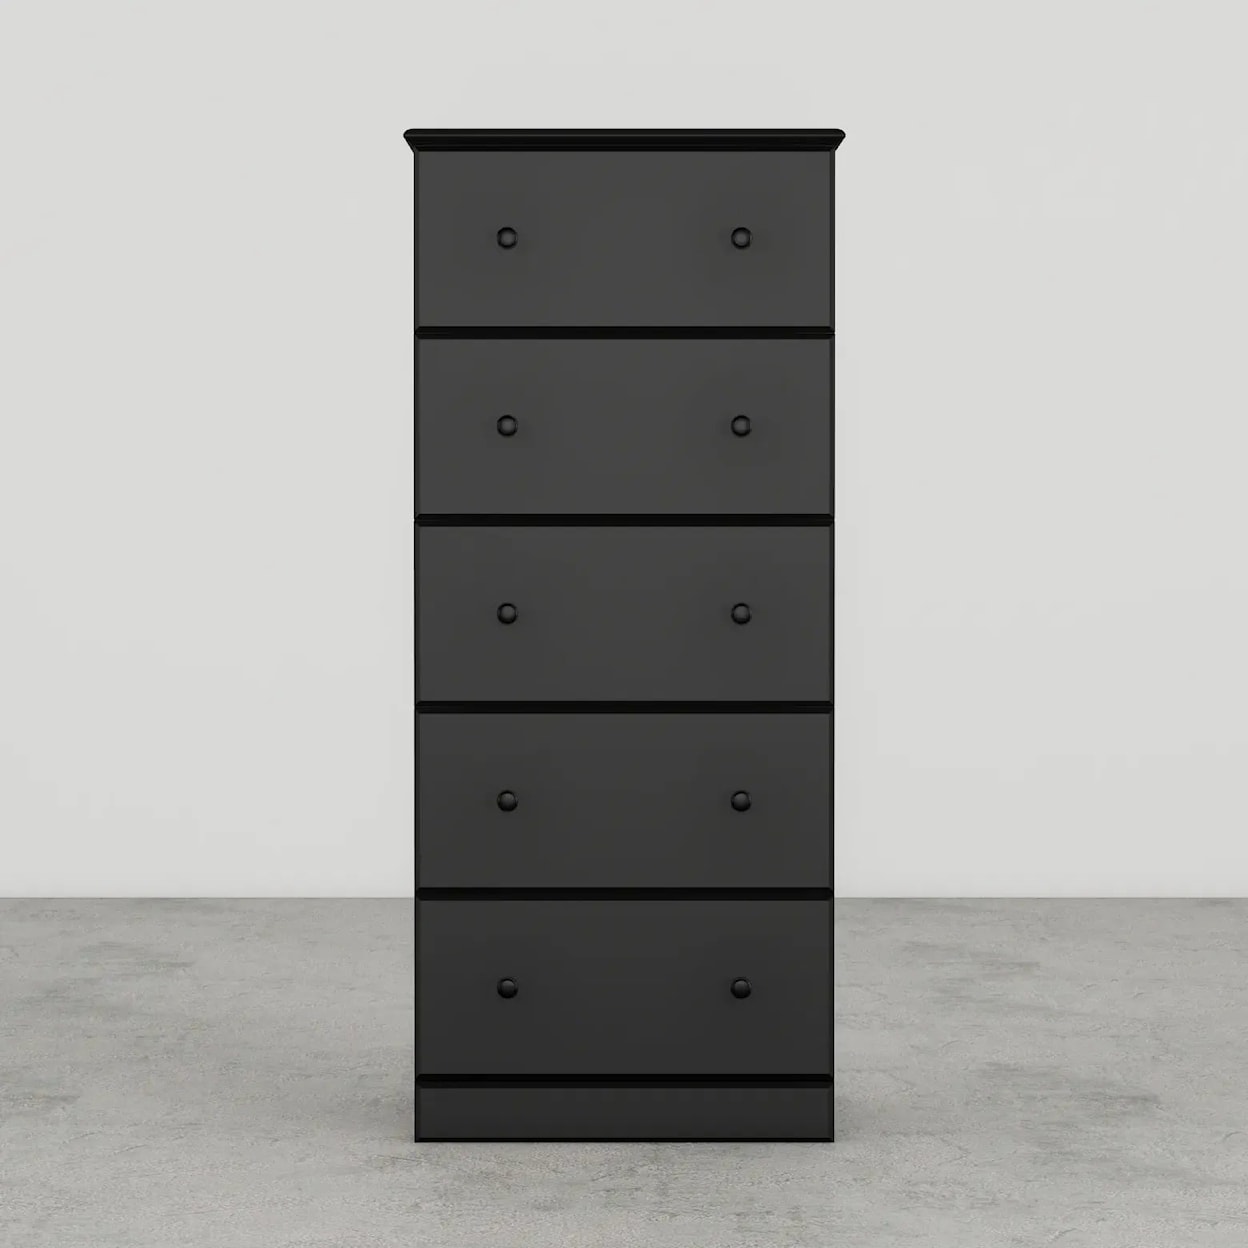 Perdue Dressers/Chests SOLID BLACK 32" 5 DRAWER CHEST |